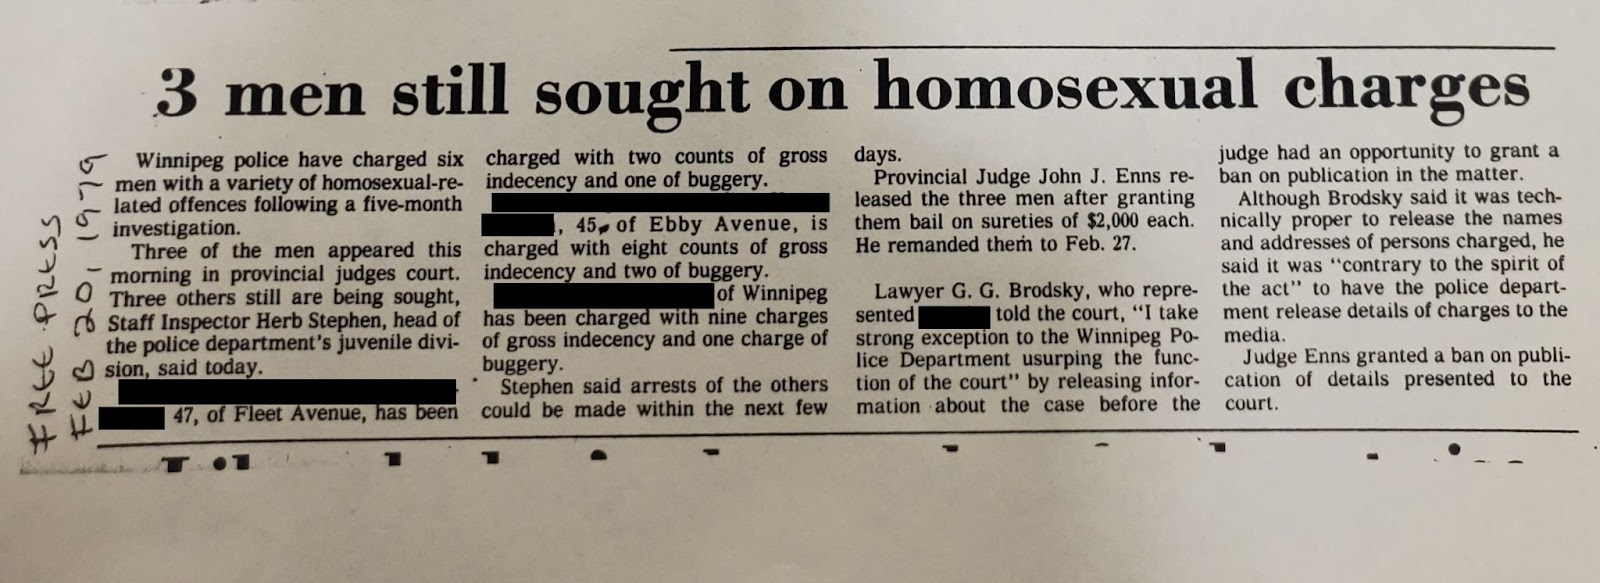 Winnipeg Free Press article, dated February 20, 1979, with a title that reads, “3 men still sought on homosexual charges.”